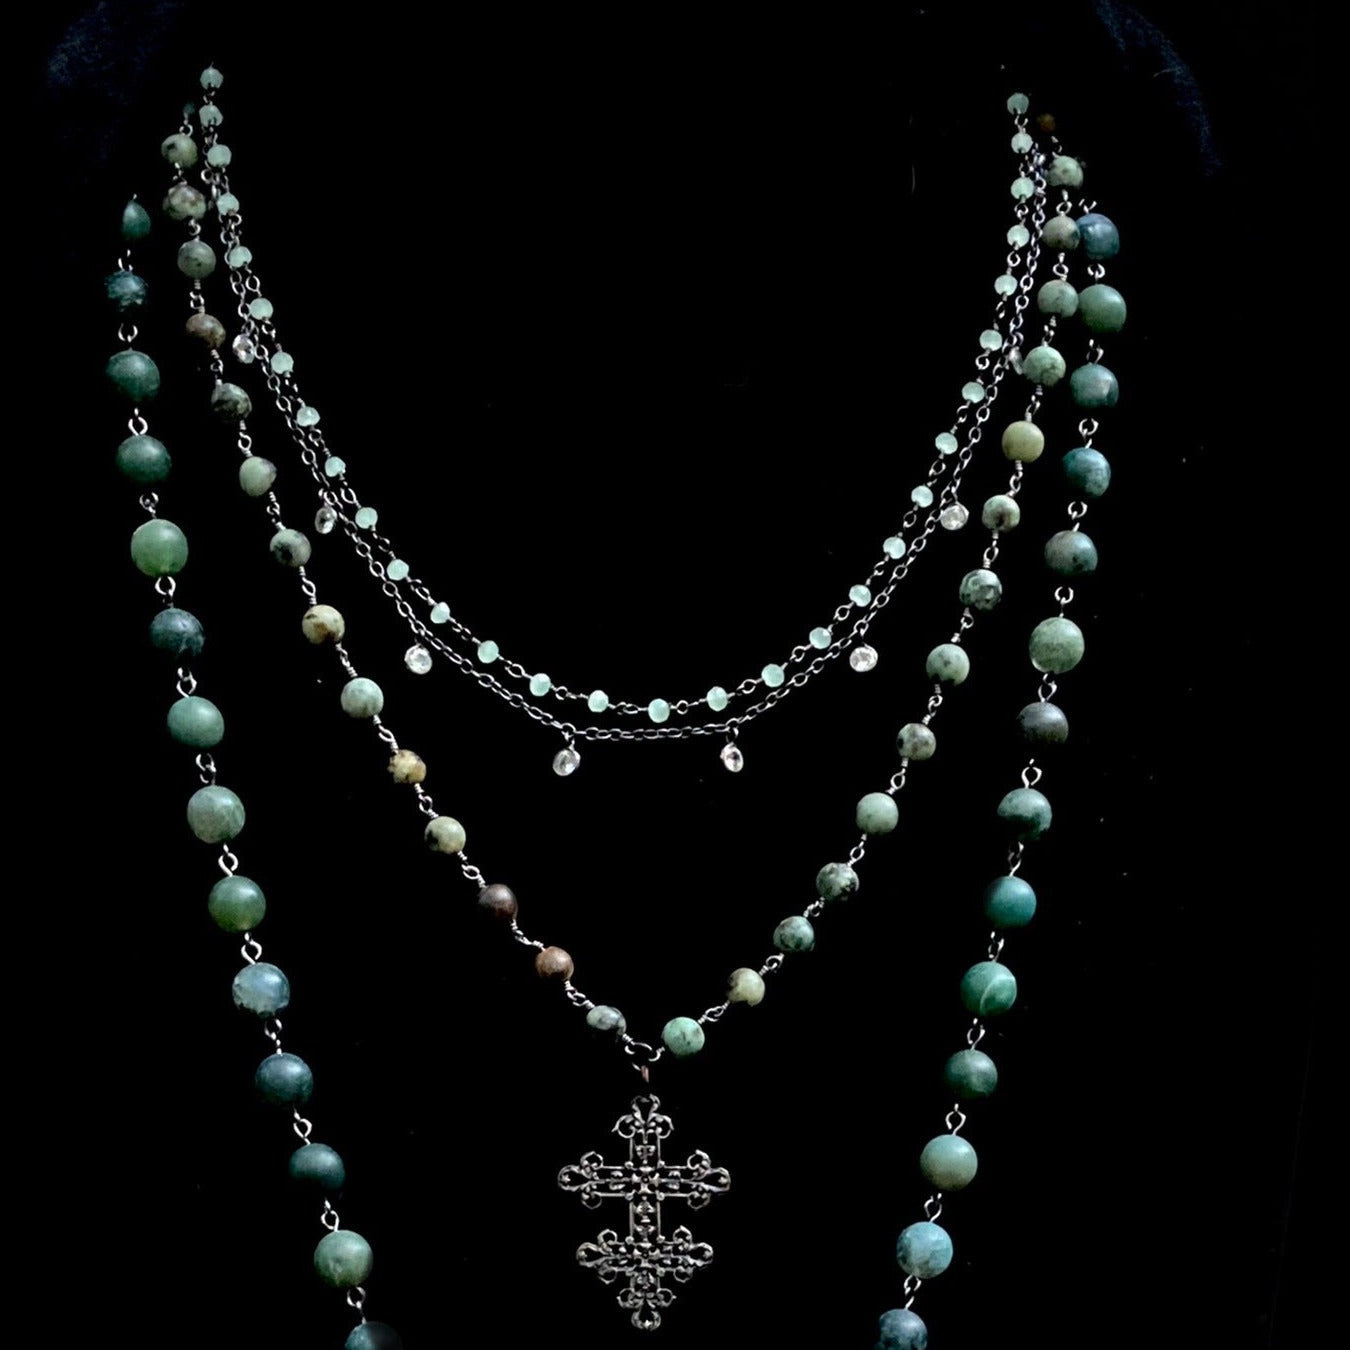 Moss Fusion Lacey Lorraine Cross with Madonna Necklace by Whispering Goddess